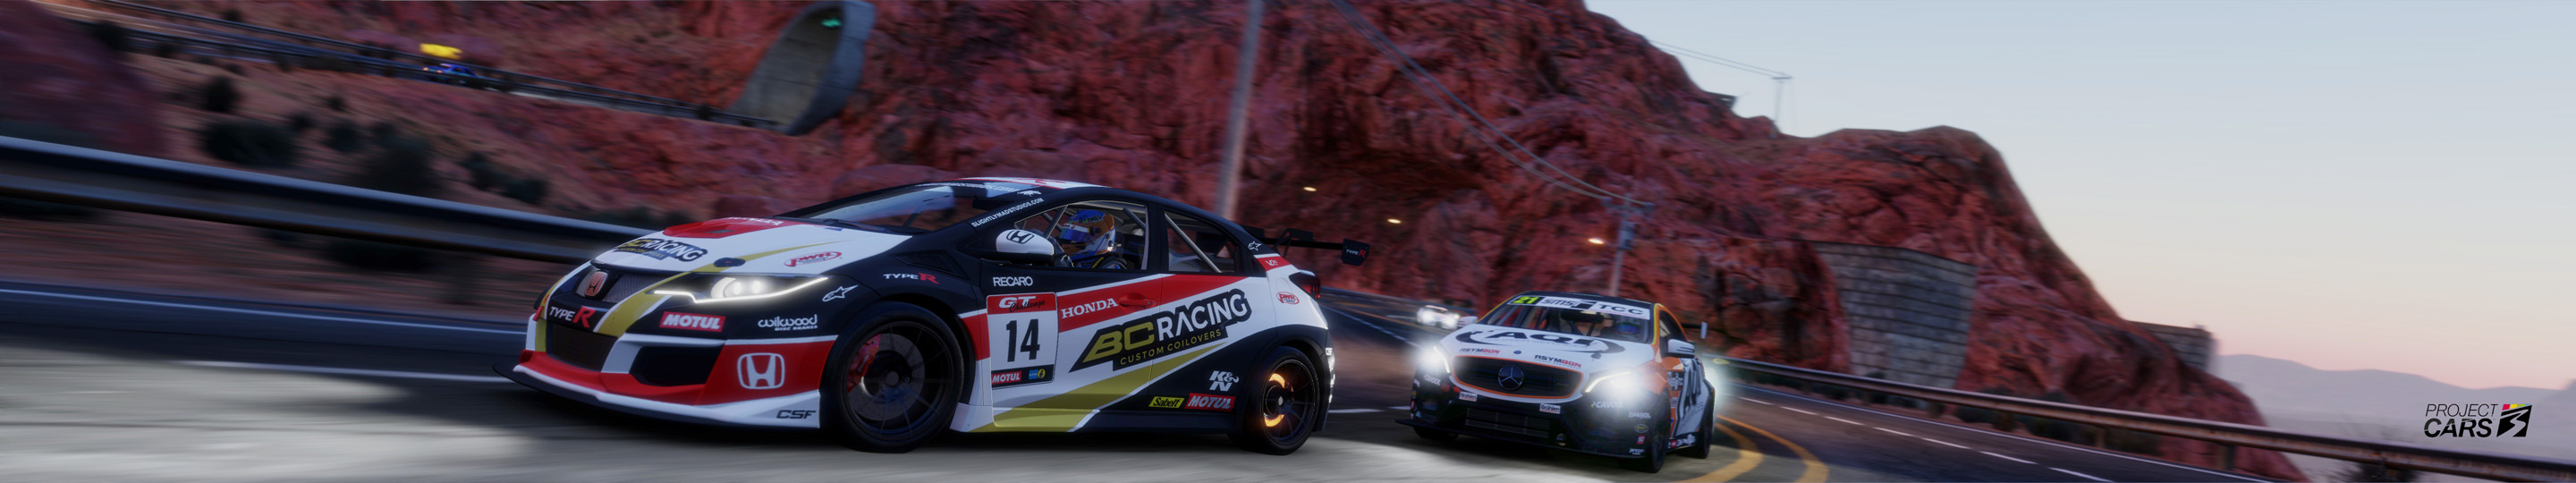 6 PROJECT CARS 3 MONUMENT CANYON with PIR RANGE CARS copy.jpg